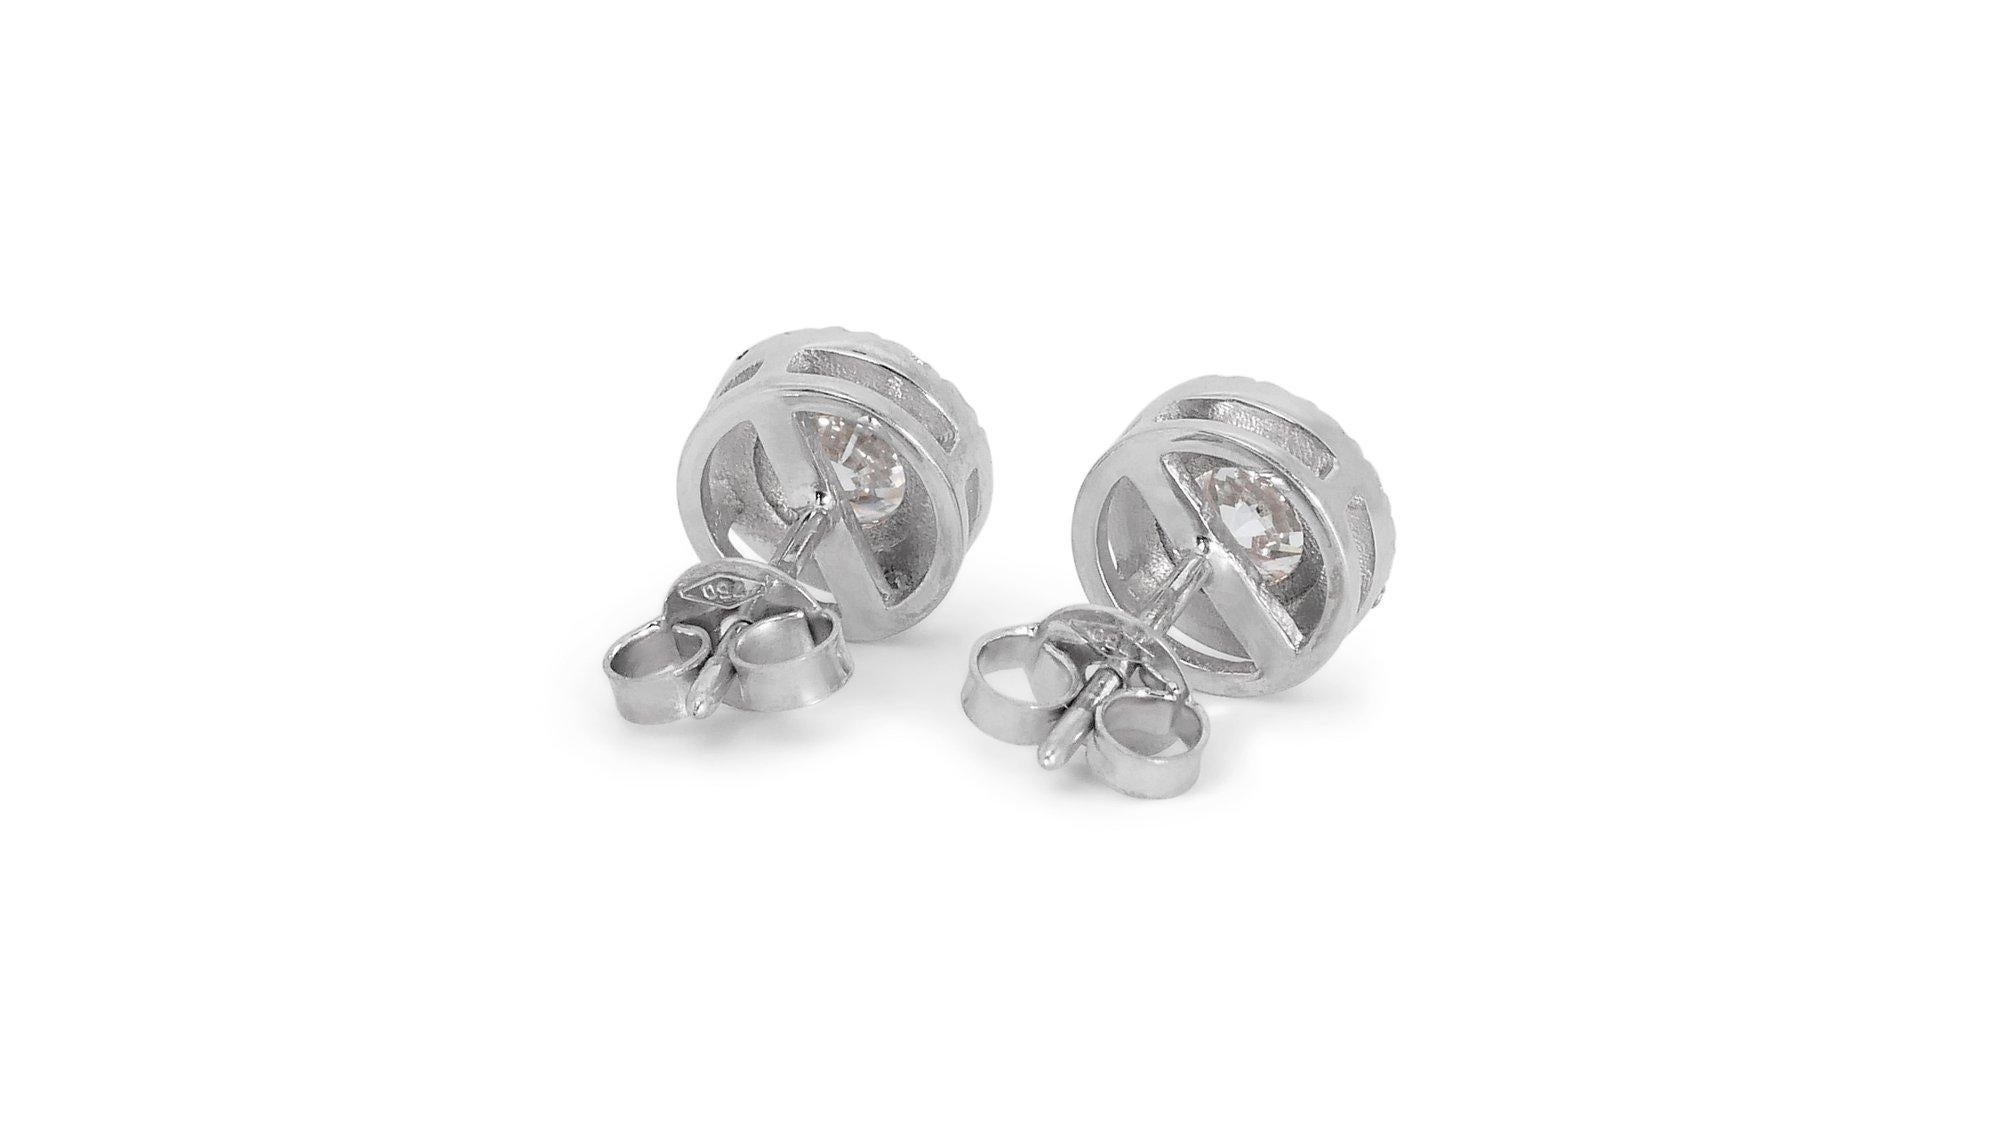 Dazzling 1.65ct Diamond Halo Stud Earrings in 18k White Gold - GIA Certified In New Condition For Sale In רמת גן, IL